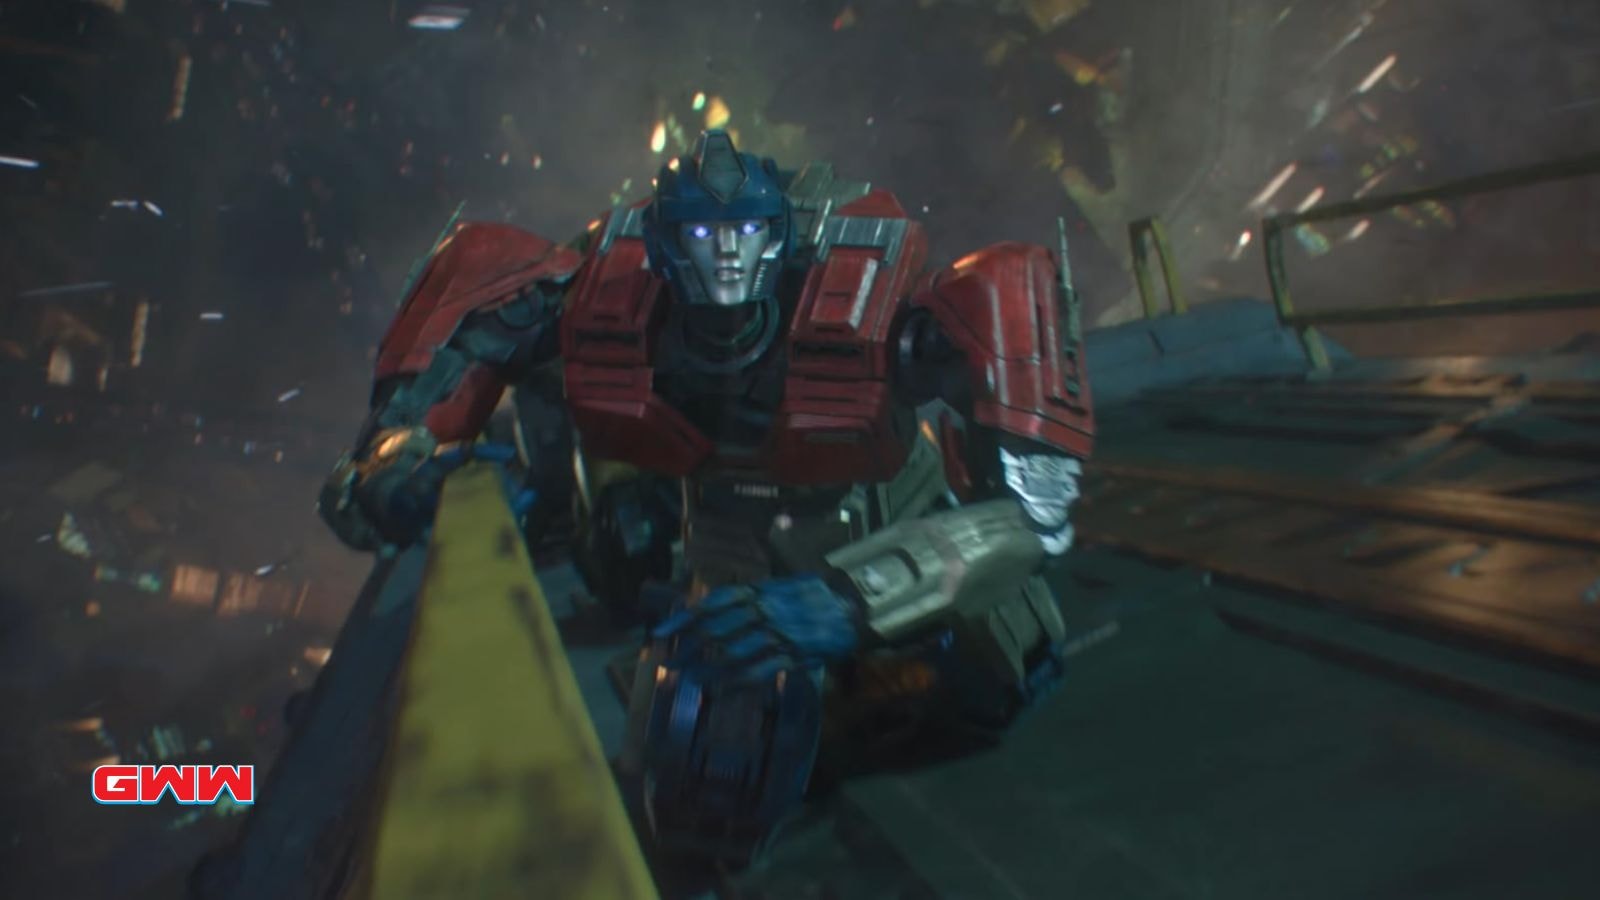 Orion Pax, Optimus Prime voice by Chris Hemsworth, Transformers One 2024